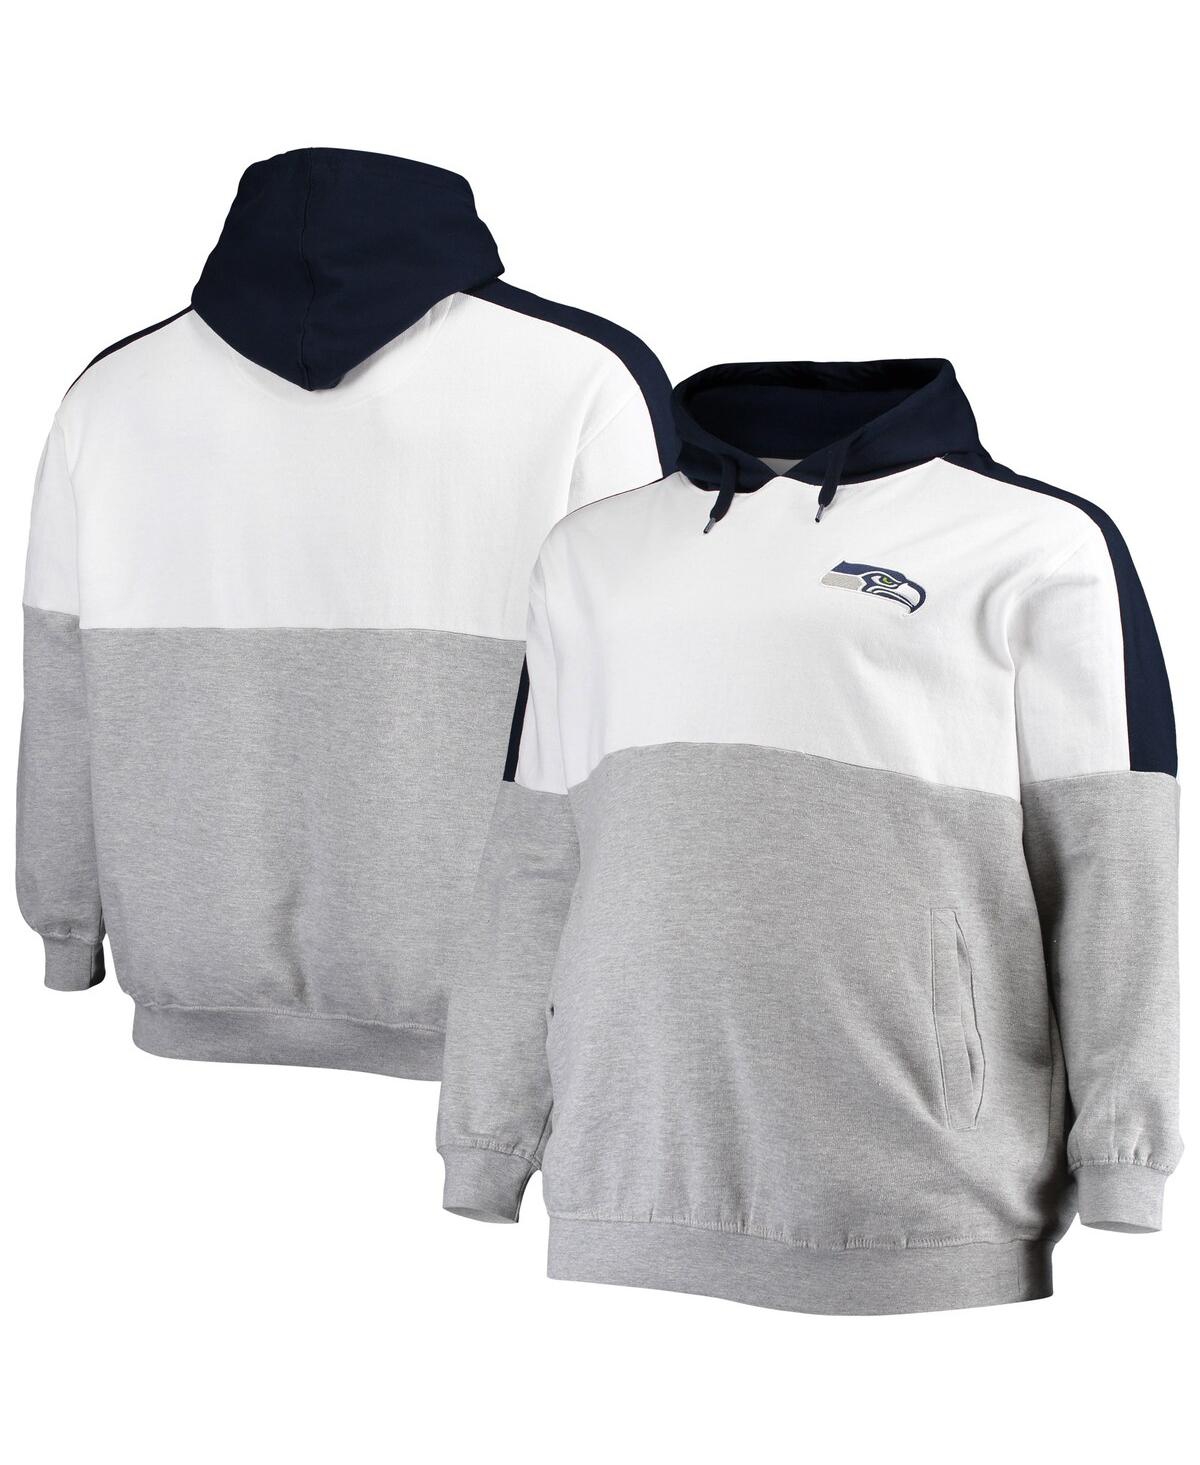 PROFILE MEN'S COLLEGE NAVY, HEATHERED GRAY SEATTLE SEAHAWKS BIG AND TALL TEAM LOGO PULLOVER HOODIE